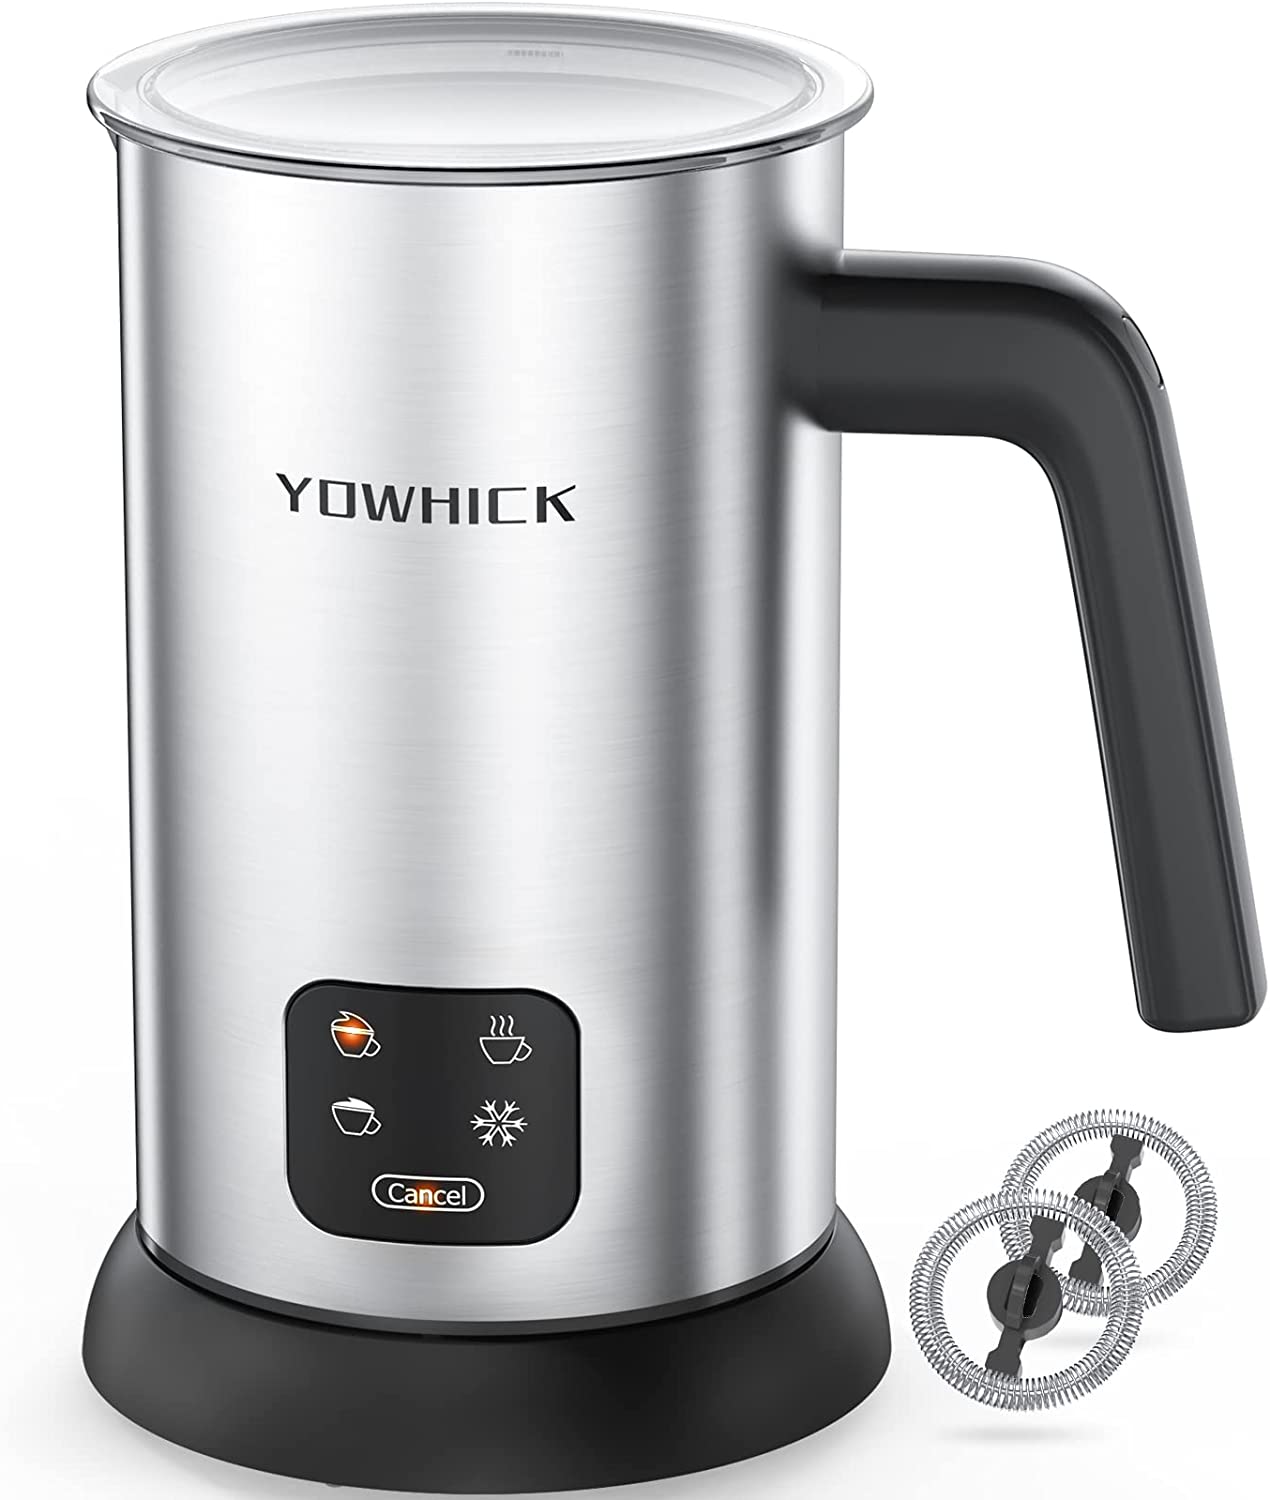  YOWHICK Milk Frother, 4-in-1 Electric Milk Steamer Stainless  Steel,10.1oz/300ml Large Capacity, Automatic Hot/Cold Foam Maker and Milk  Warmer for Latte, Cappuccinos, Macchiato, Hot Chocolate,120V: Home & Kitchen